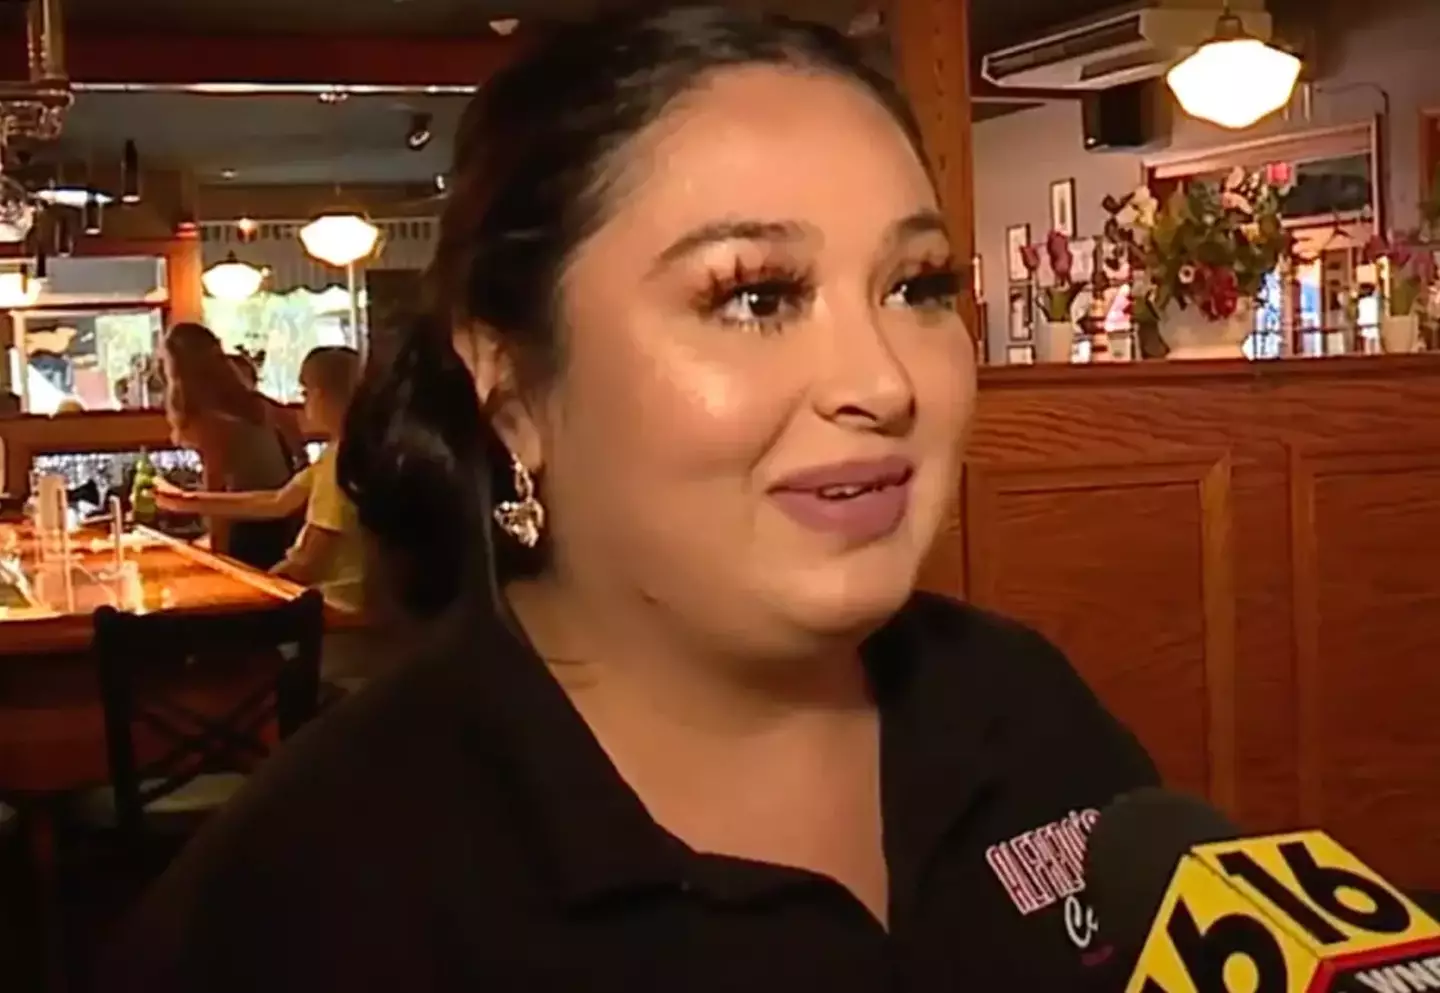 The waitress become emotional after seeing the tip. (WNEP)